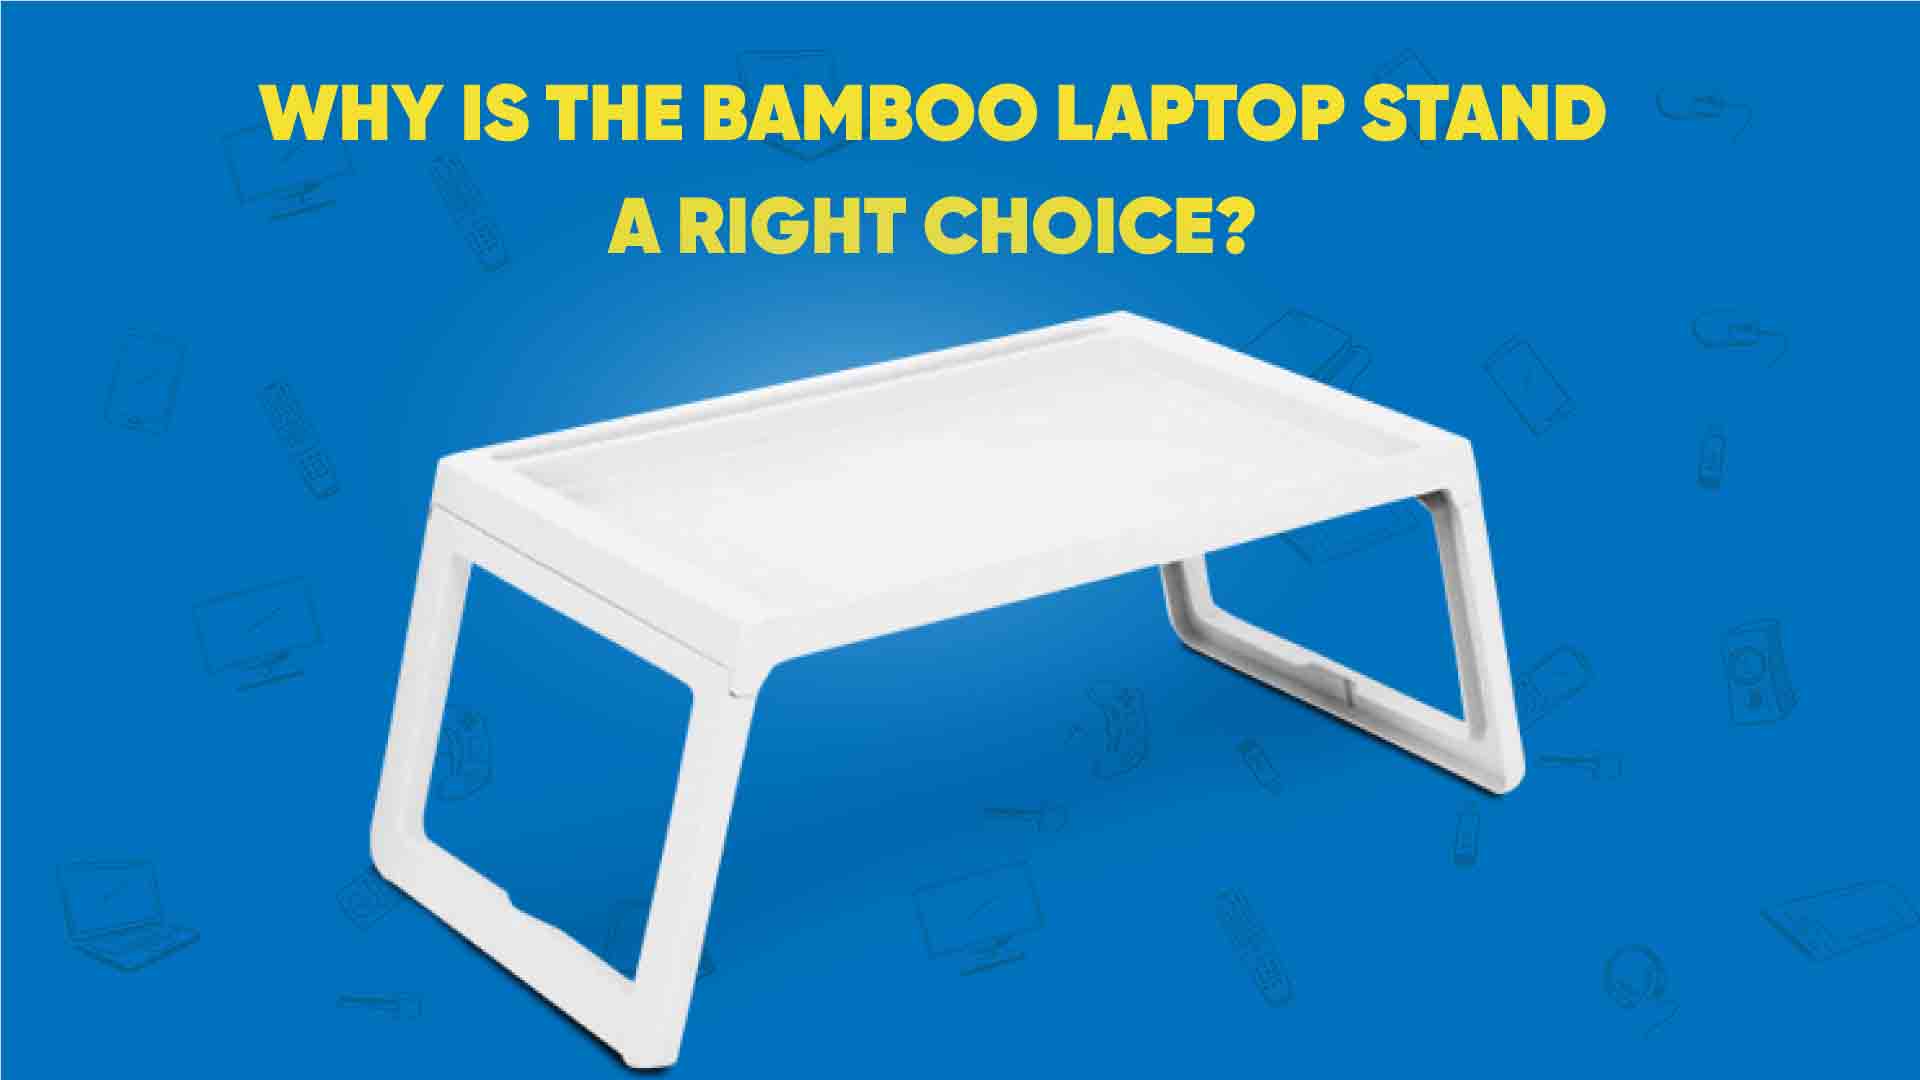 Why is the Bamboo Laptop Stand a Right Choice